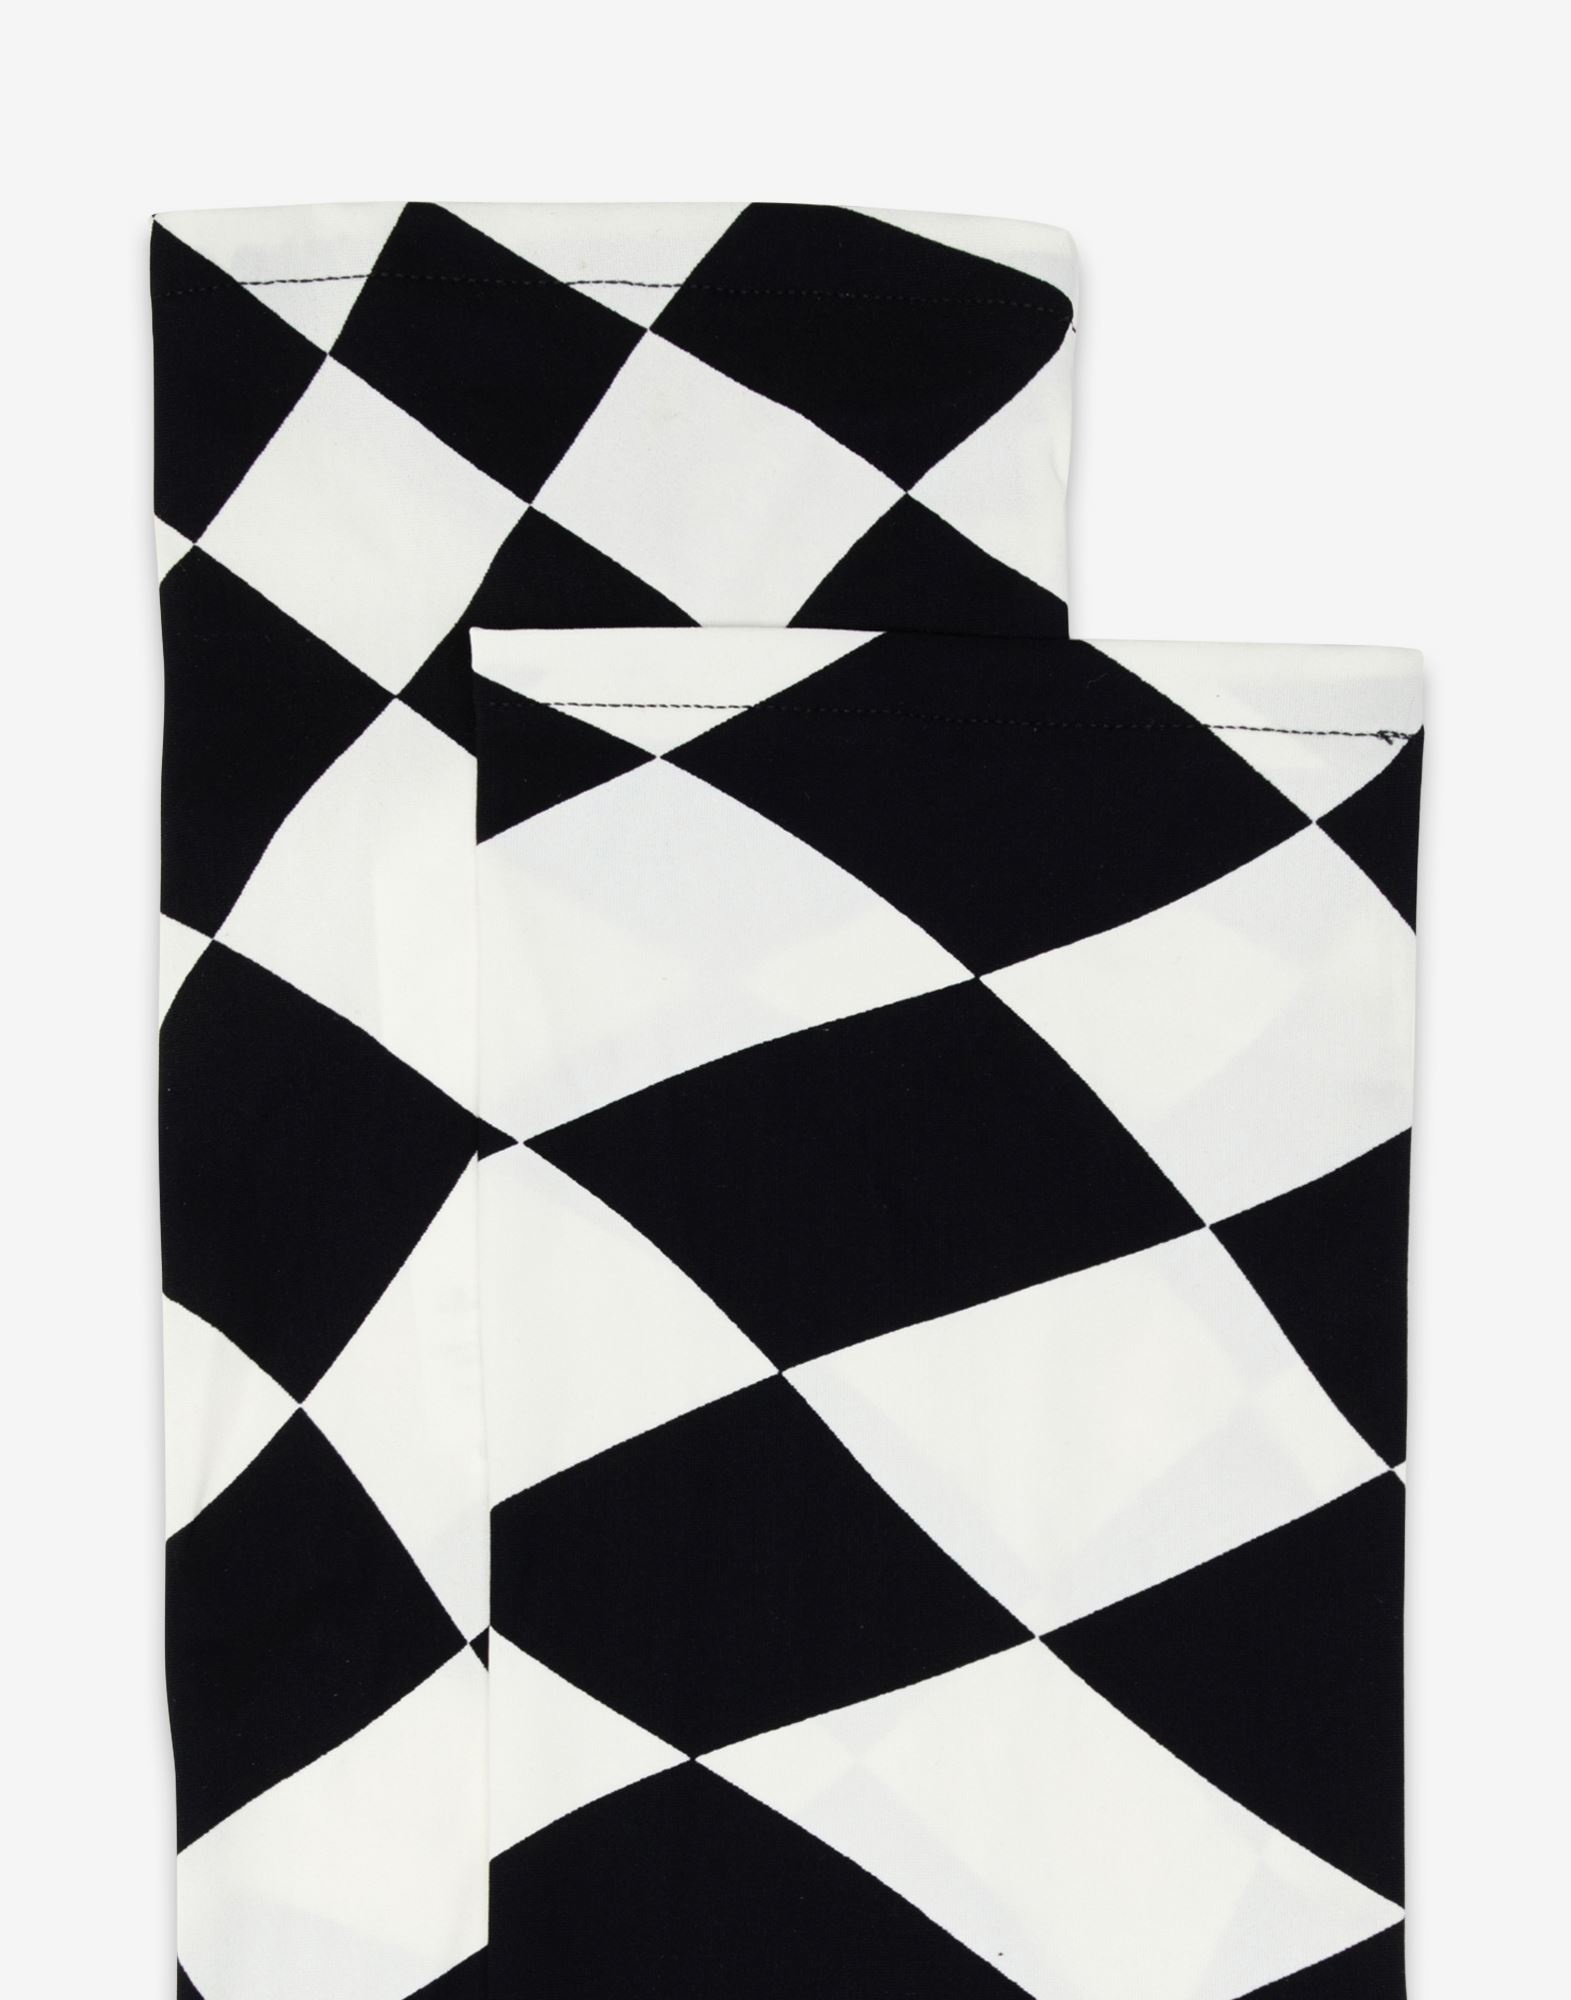 Distorted chess print elbow-length gloves - 2